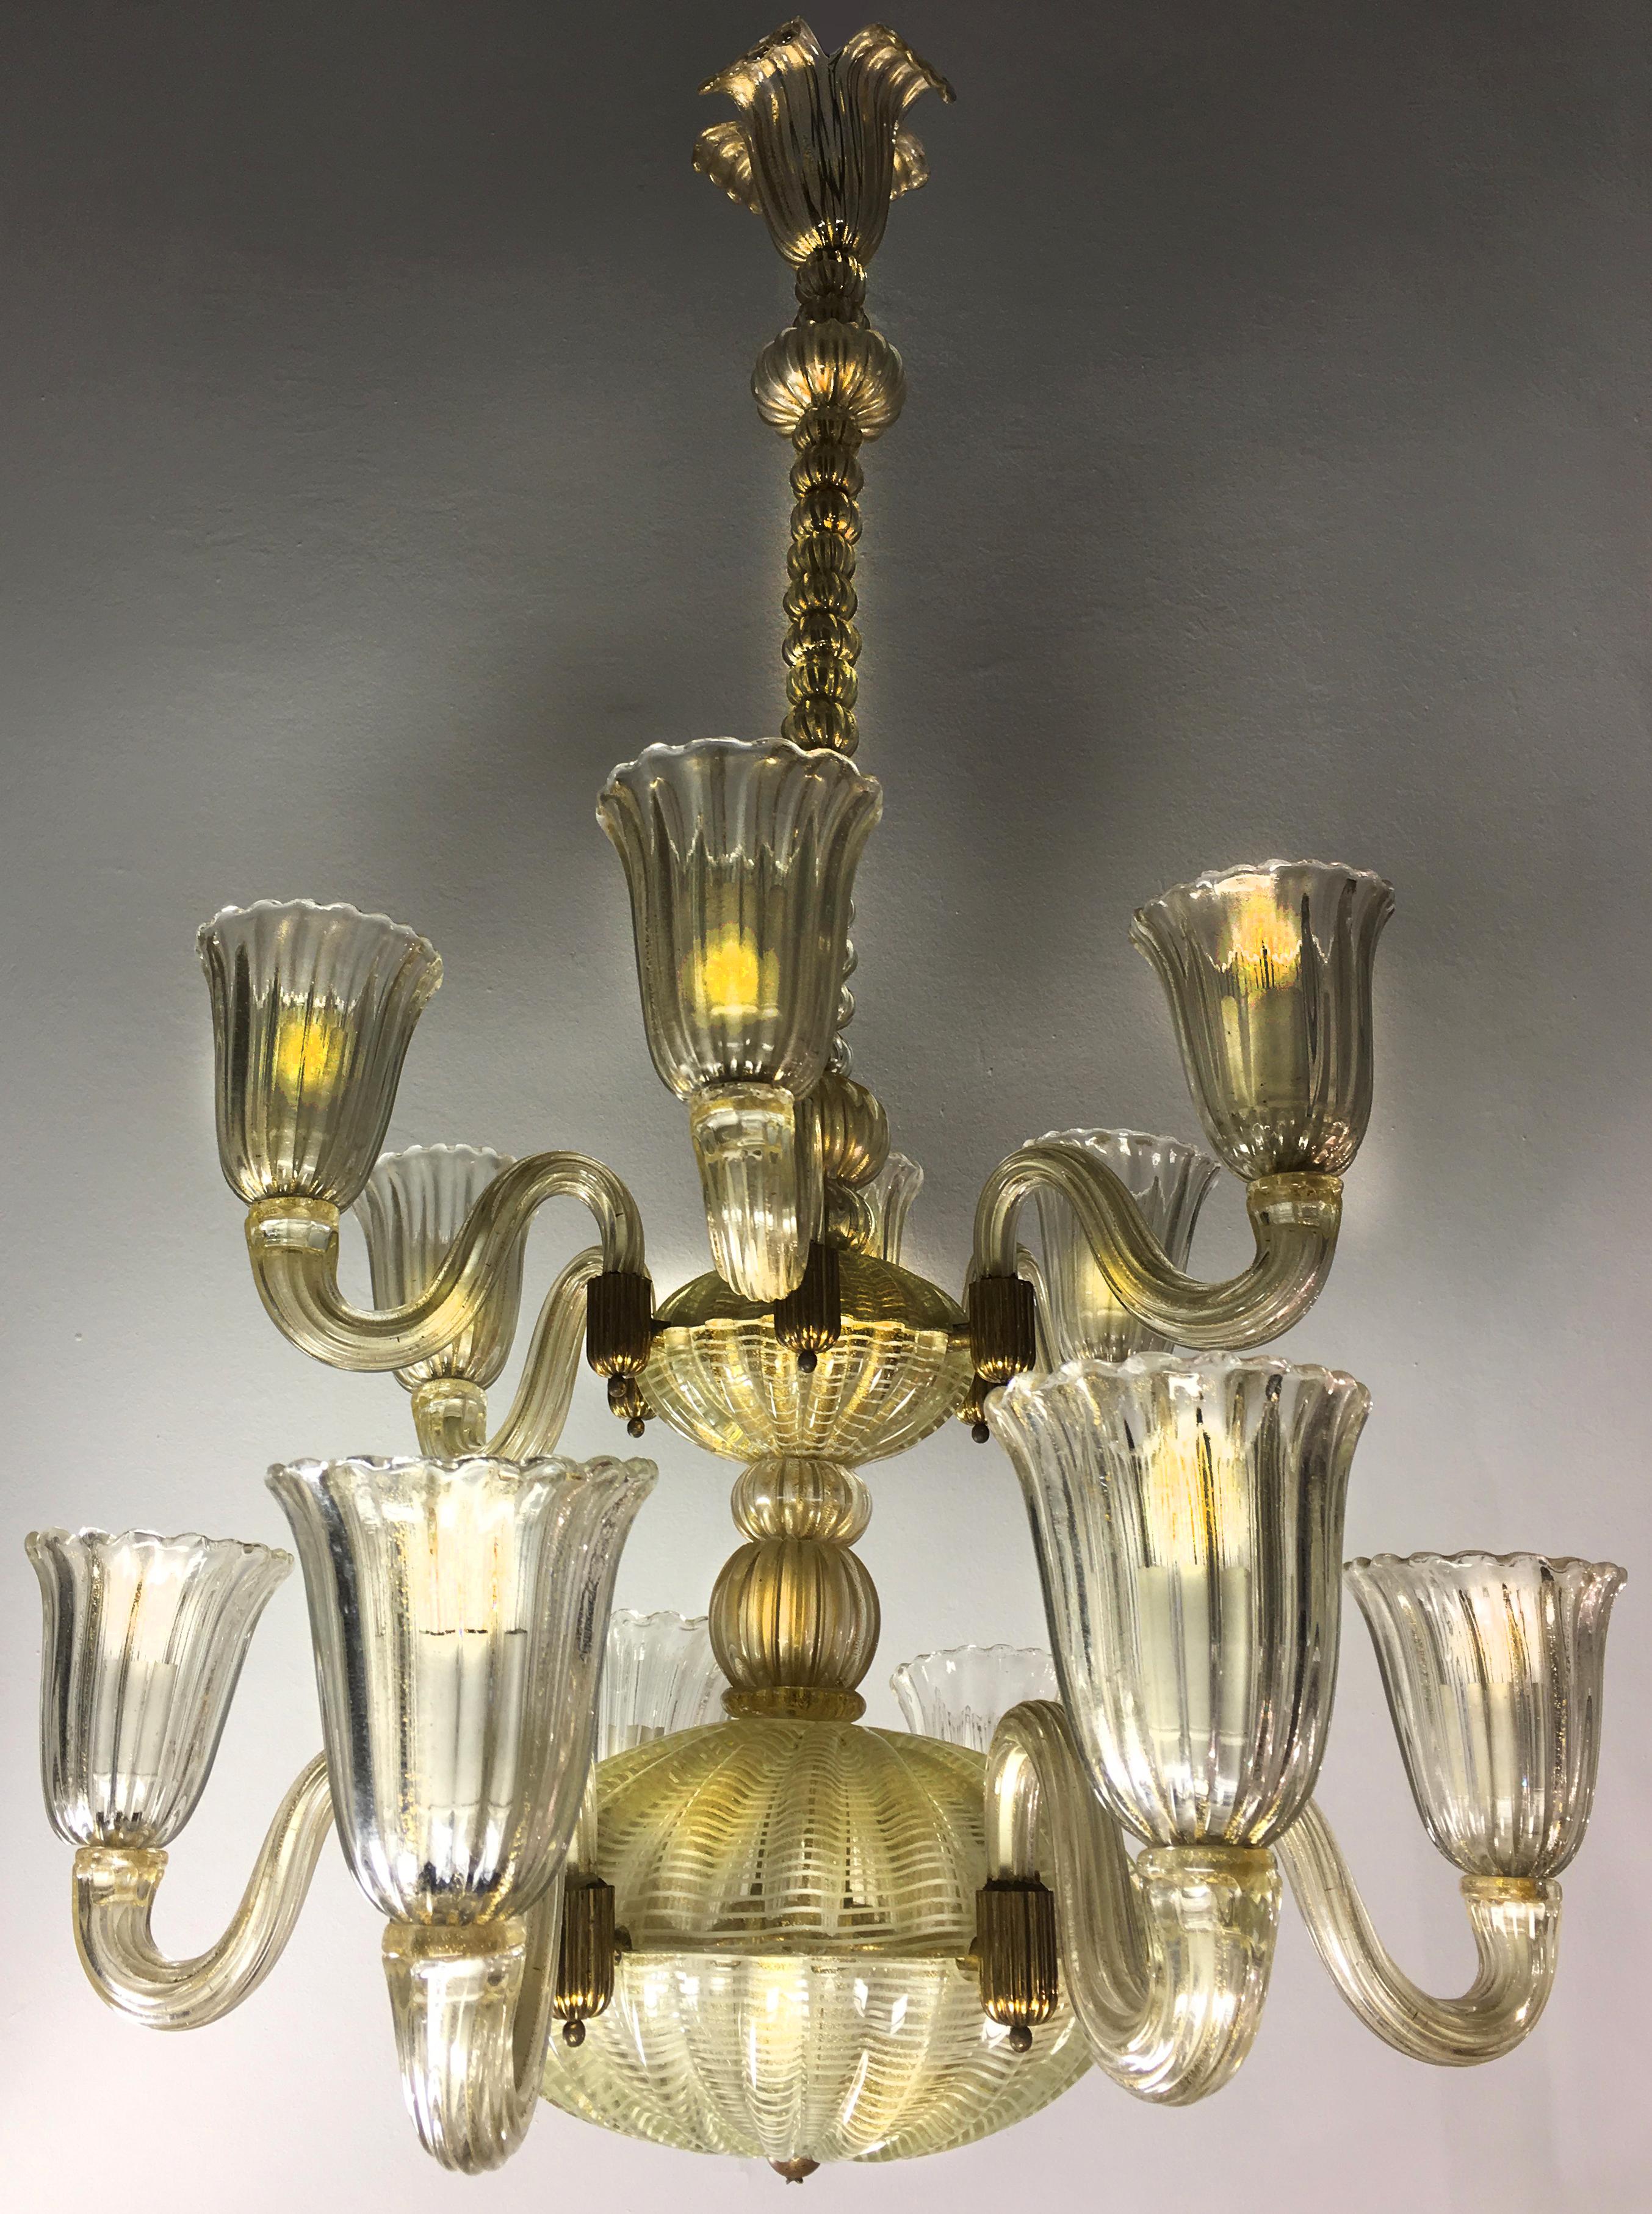 Italian Chandelier Gold Inclusion by Barovier & Toso, Murano, 1940s For Sale 1